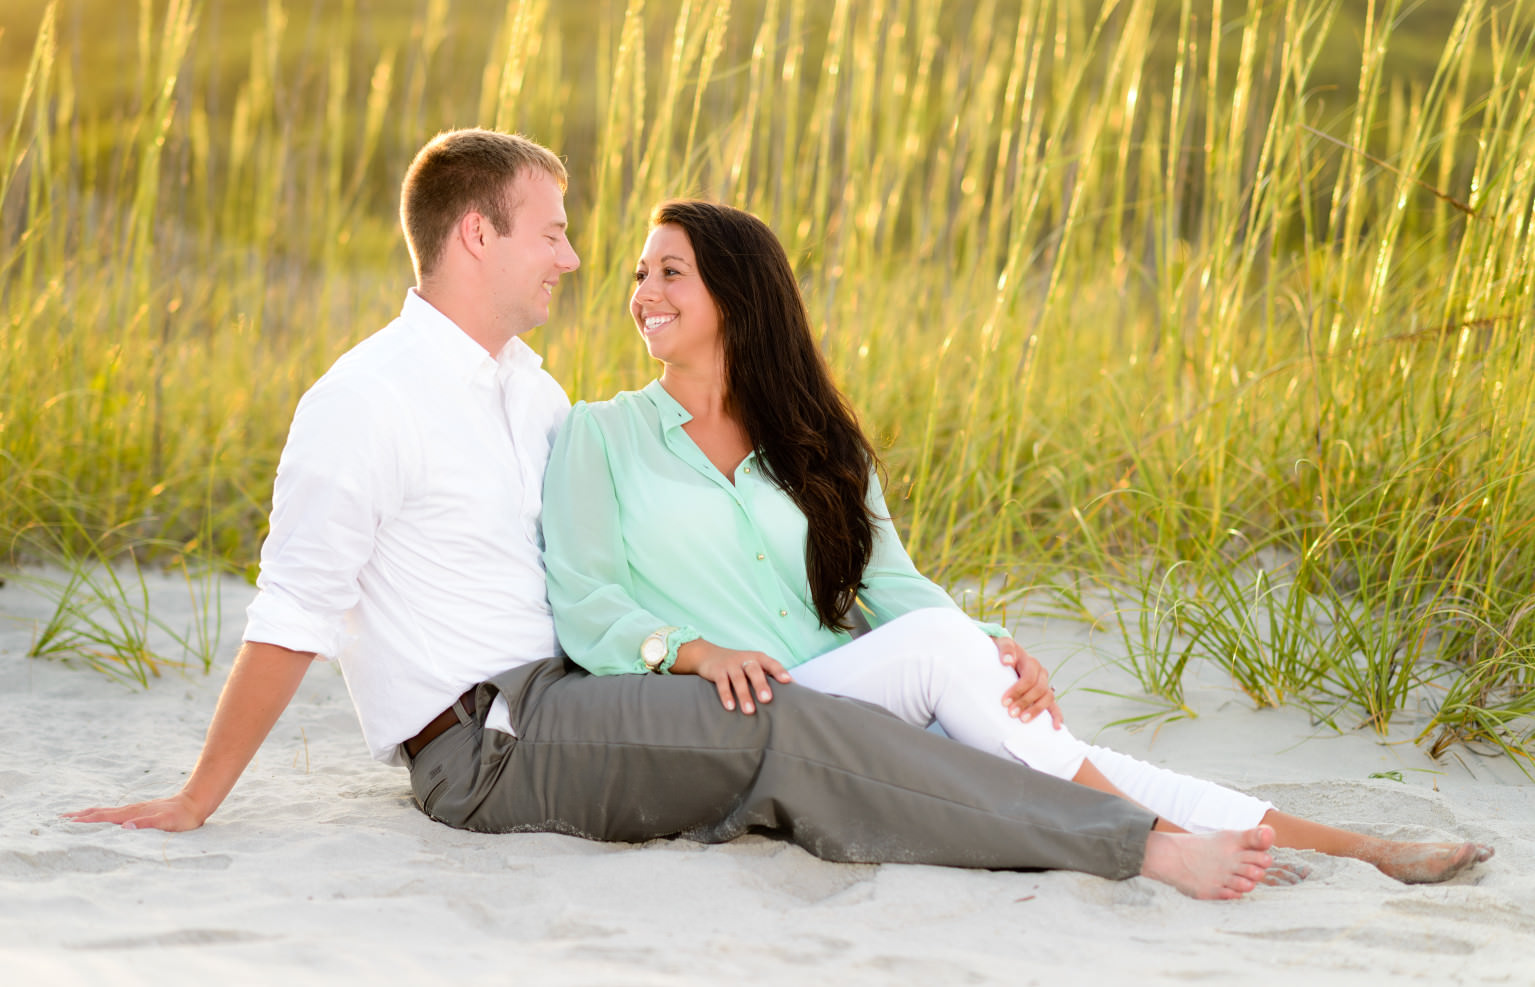 Couple smiling at each other with sunset hitting the sea oats in the background - Myrtle Beach